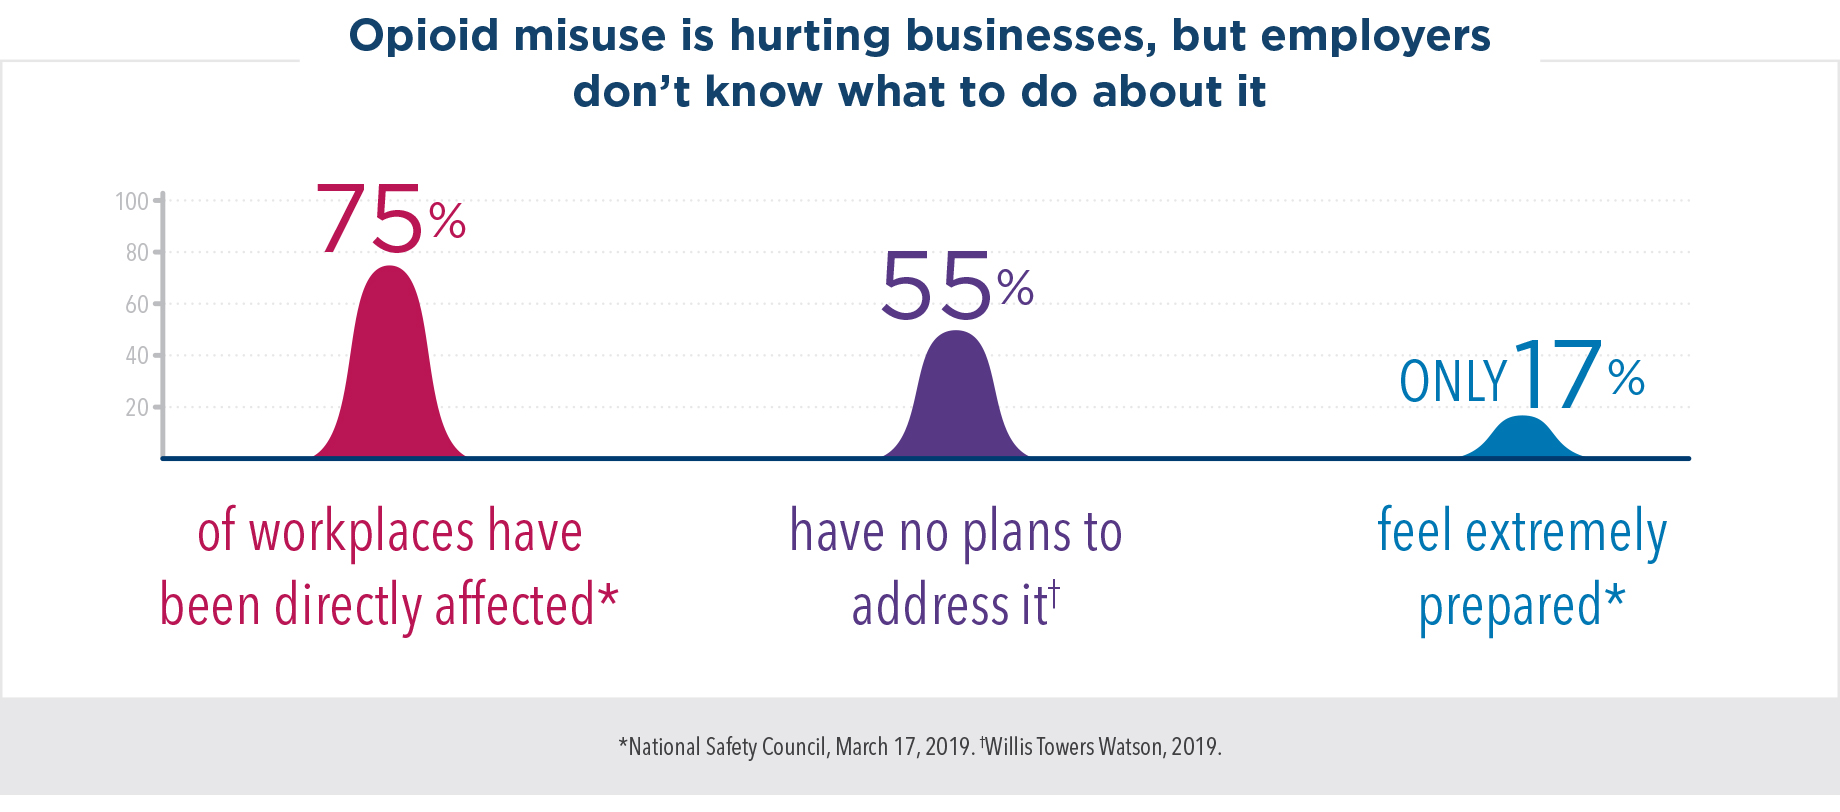 Opioid misuse is hurting businesses, but employers don’t know what to do about it. 75% of workplaces have been directly affected, but 55% have no plans to address it. Only 17% feel extremely prepared.